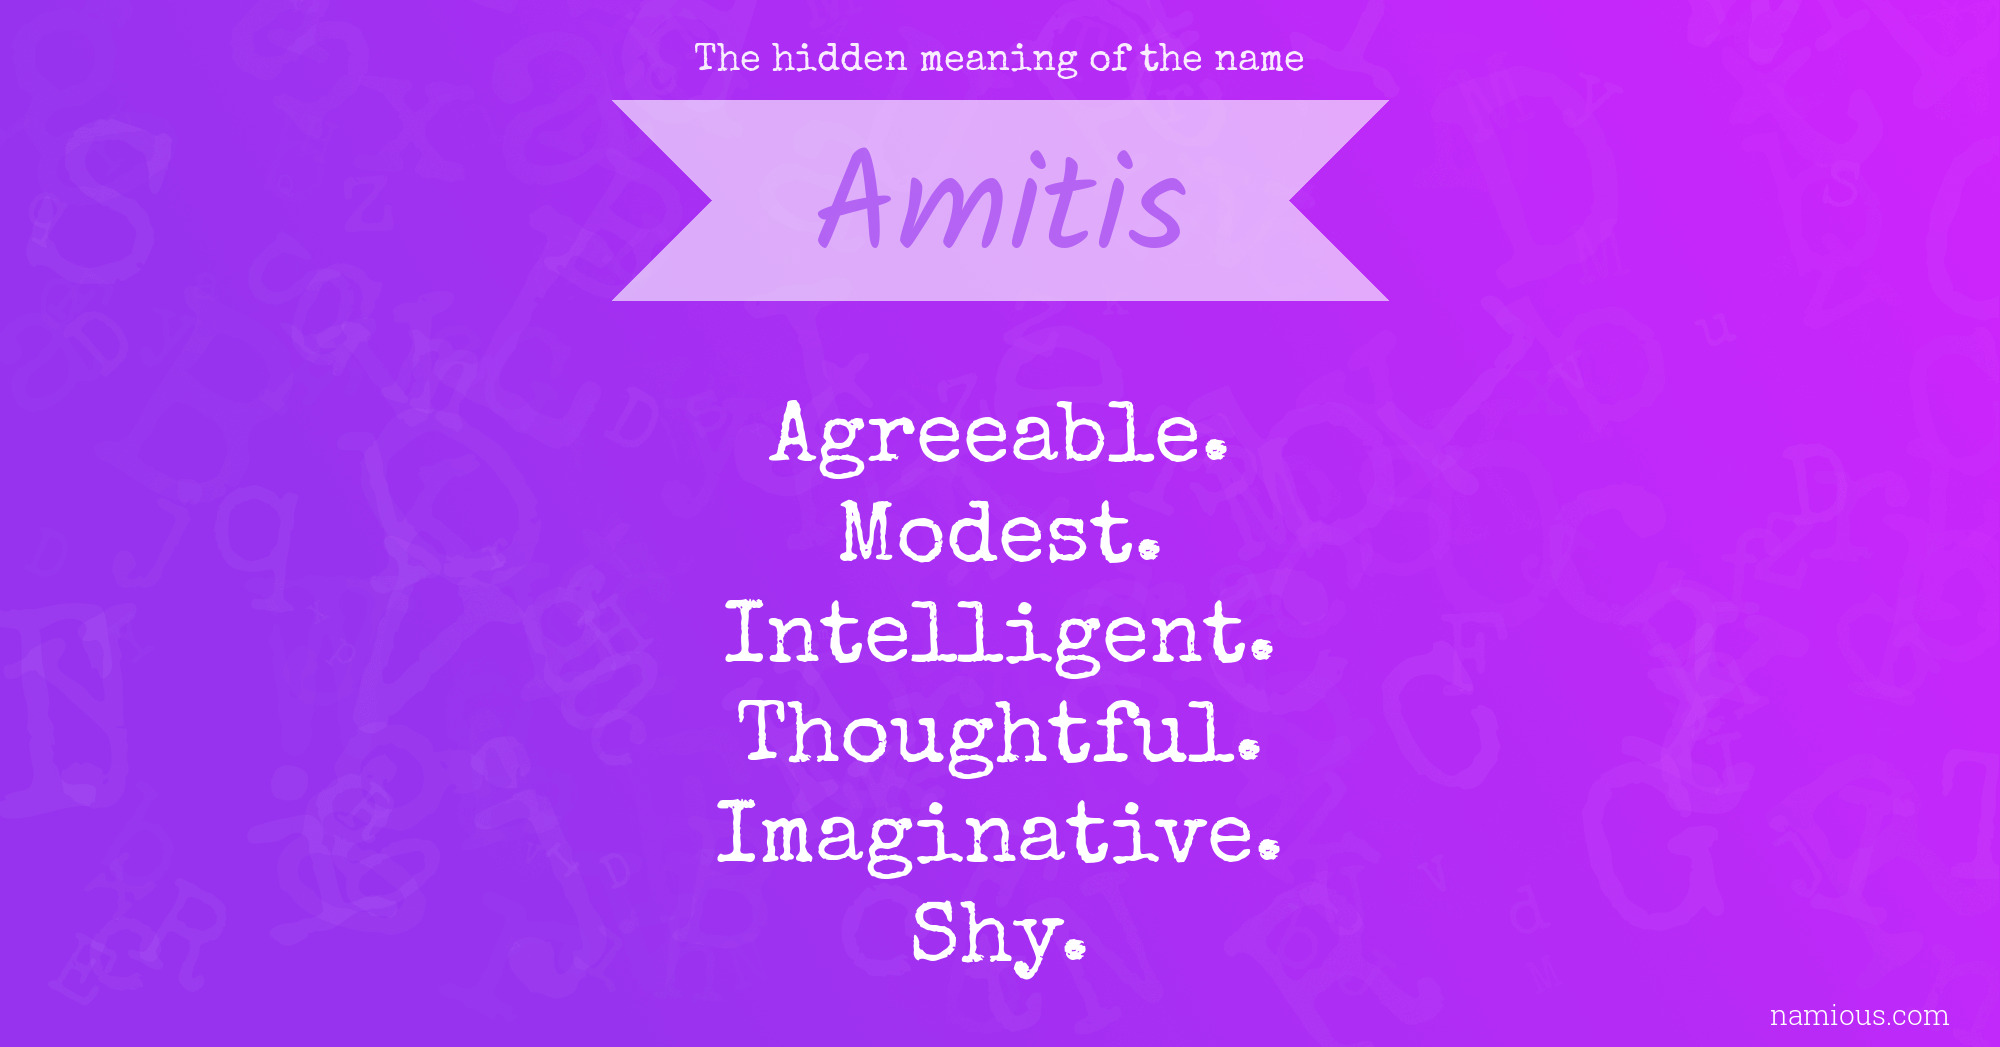 The hidden meaning of the name Amitis